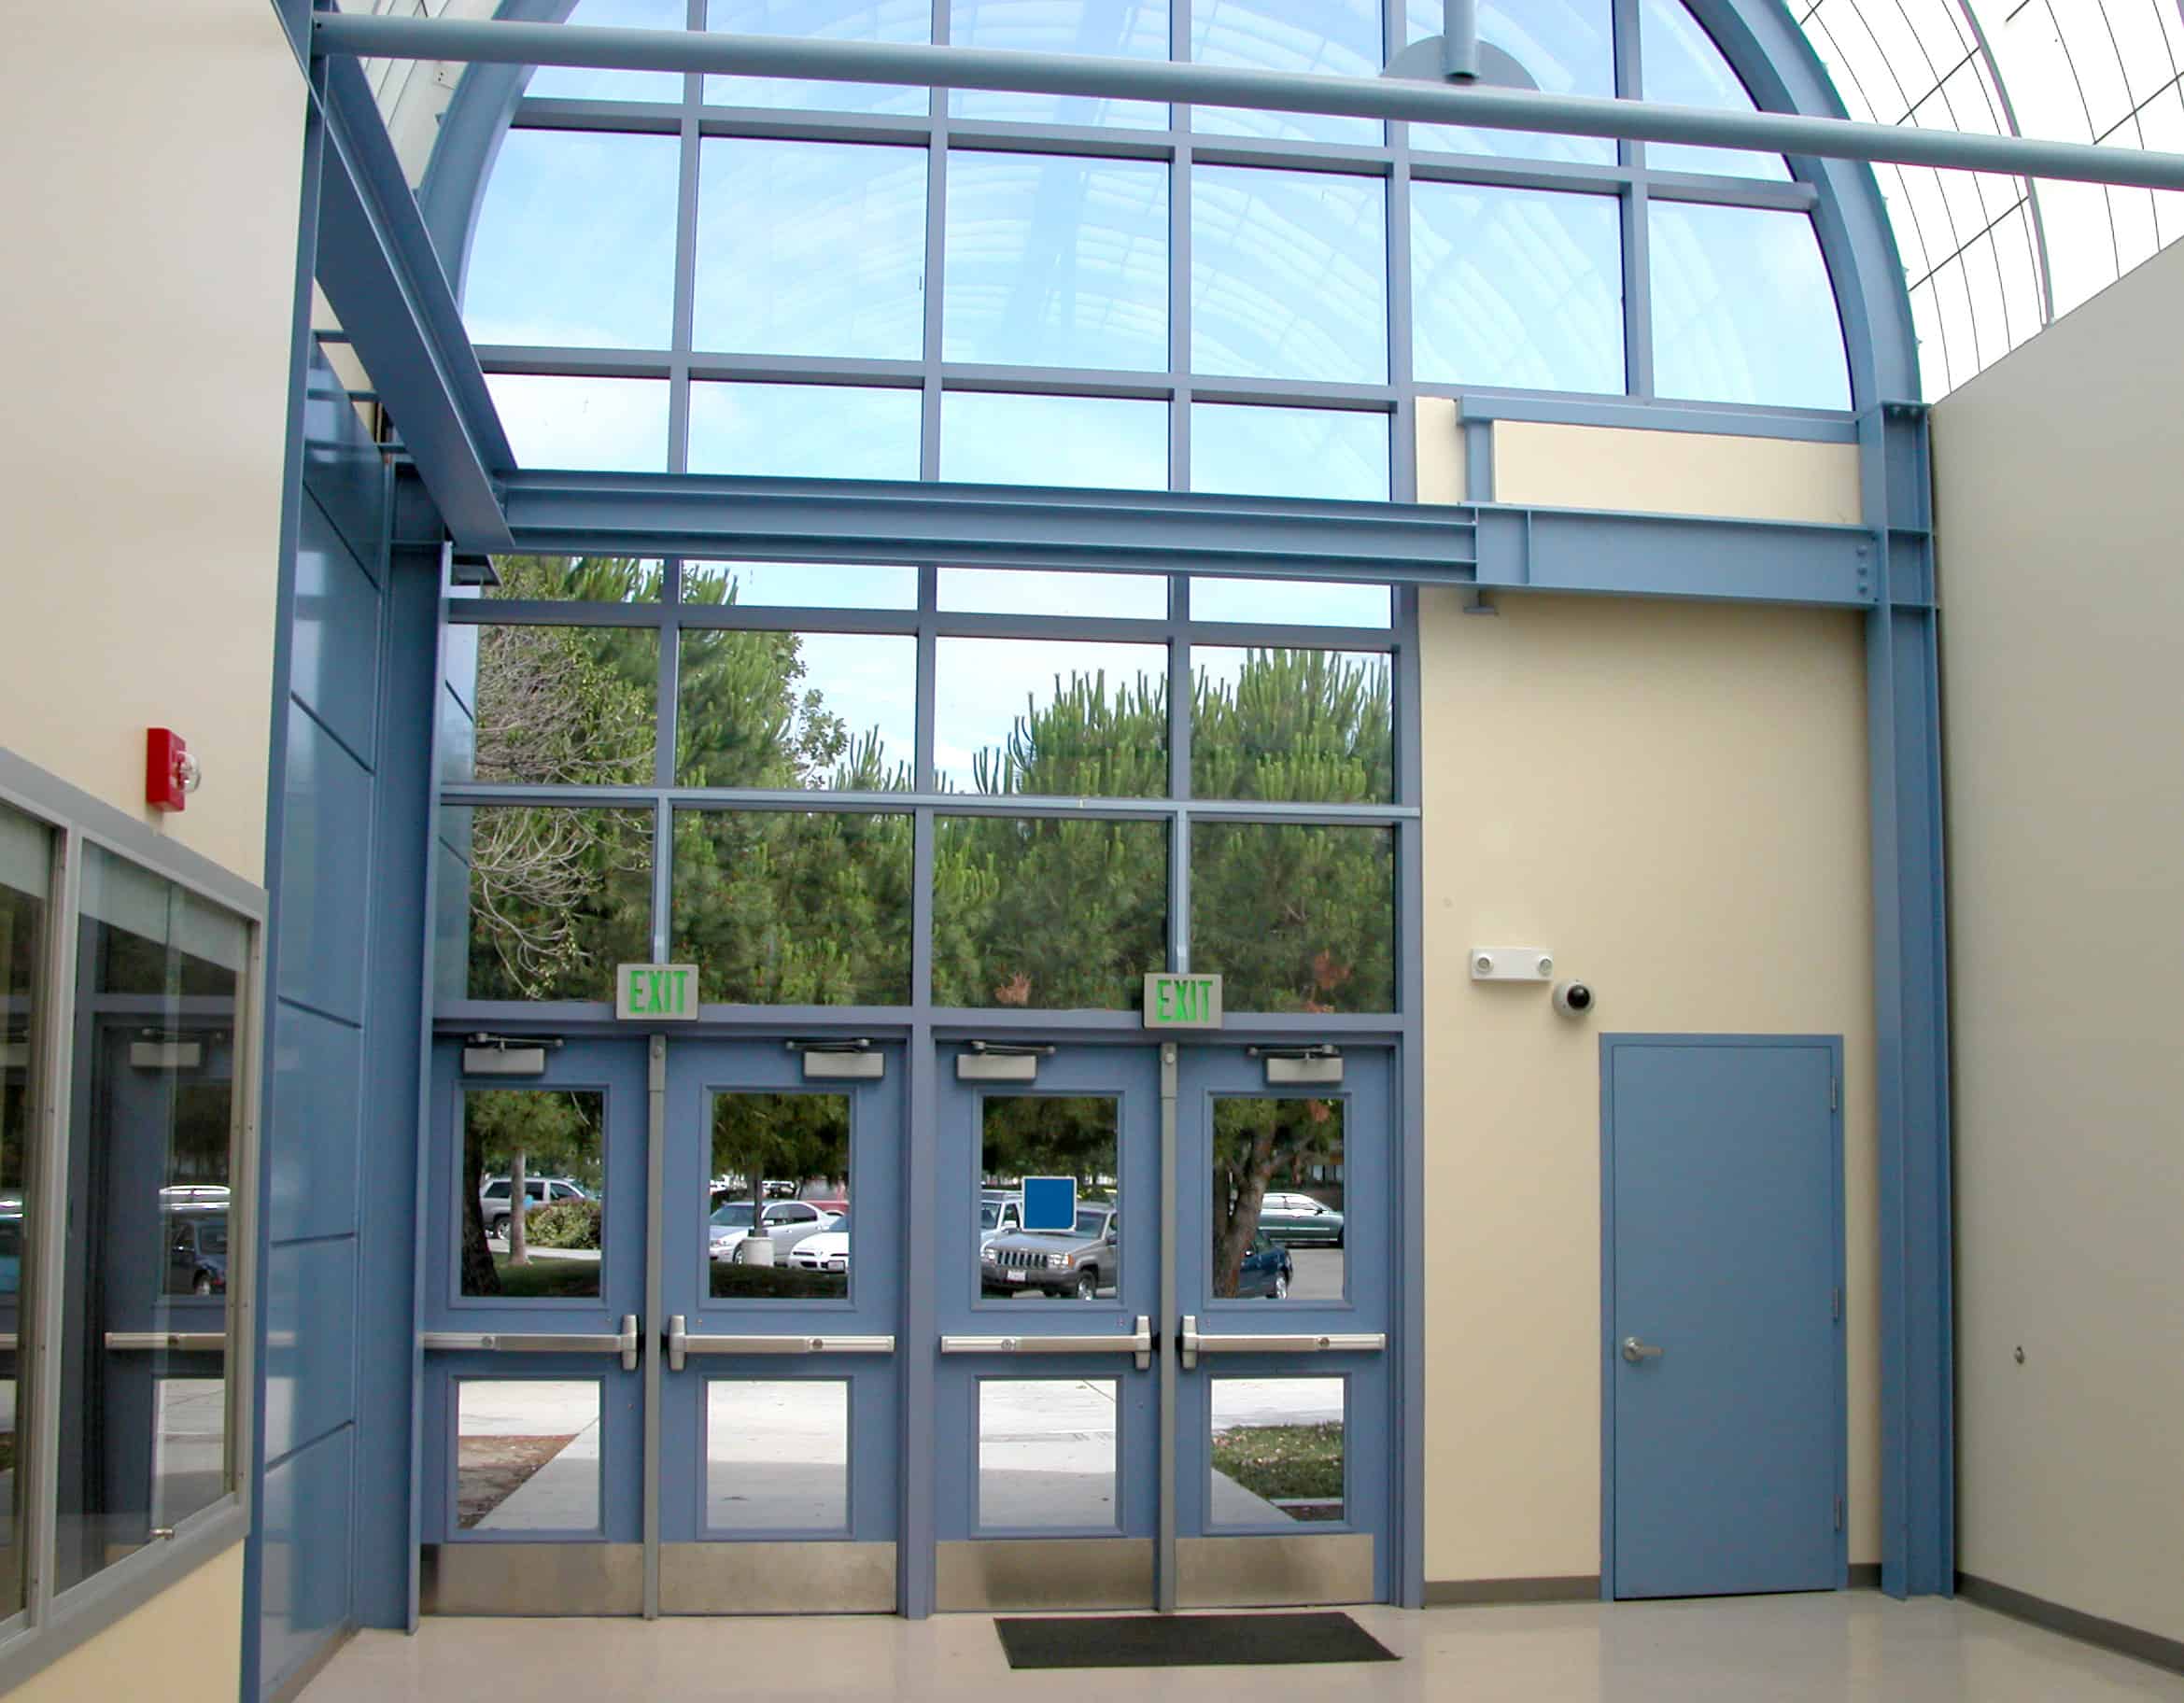 Project Profile: Newark USD Discovered the High Cost of Inexpensive Hollow Metal Doors